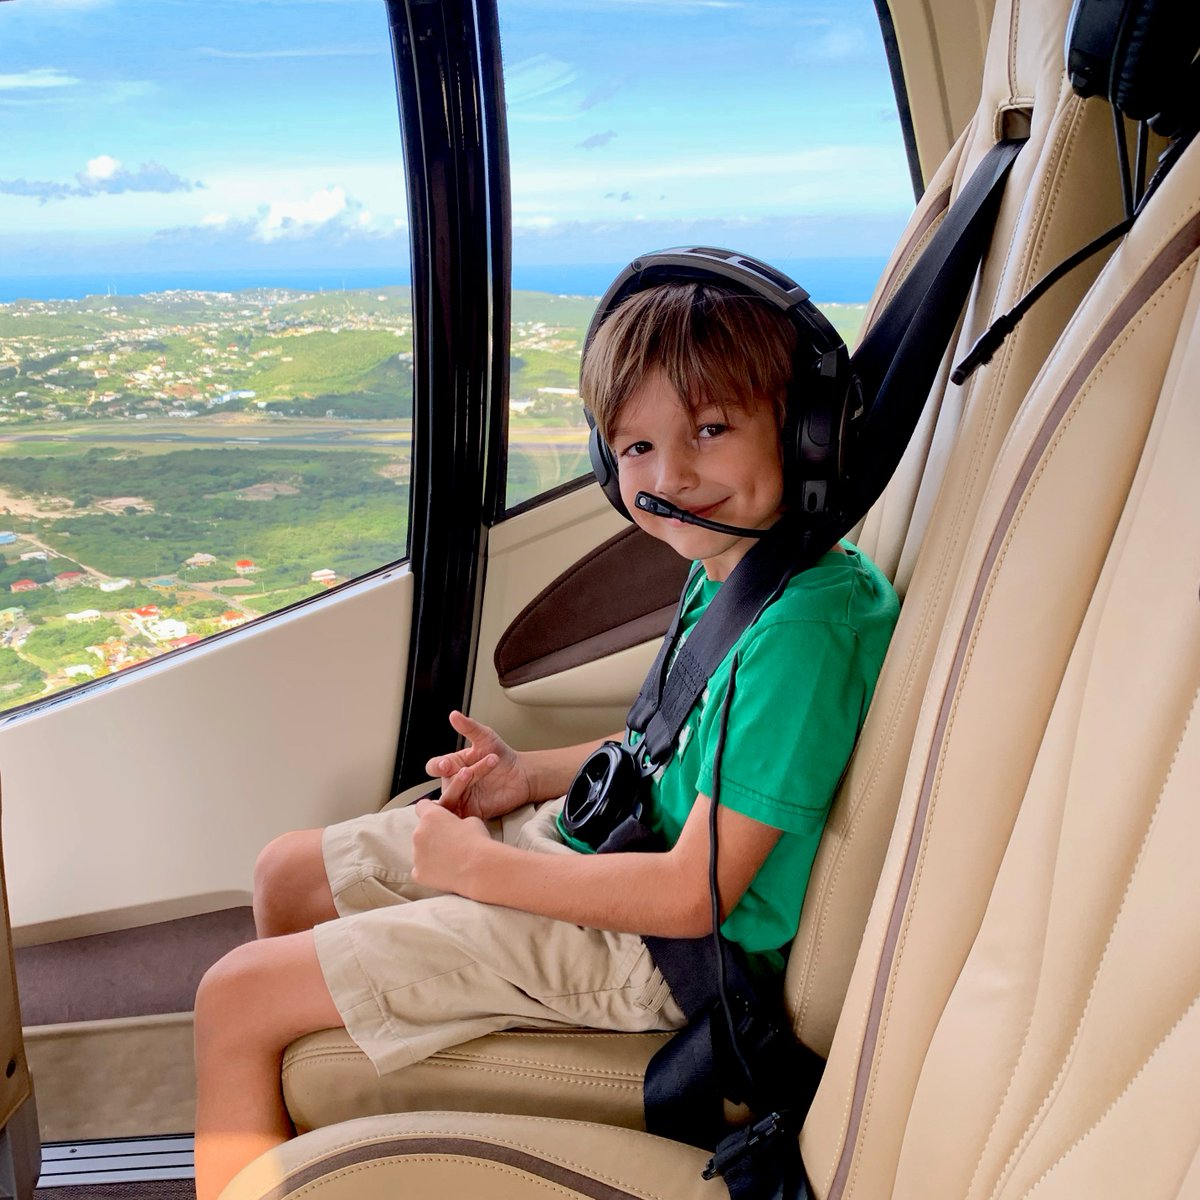 You're never too young to have the time of your life. 🩷
Welcoming aboard passengers of all ages.
__________________________________
#flycalvinair #antiguaislandtour #montserratvolcanotour #privatecharter #helicoptertour #luxurytravel #airbus #ec130 #loveantiguabarbuda #caribbean